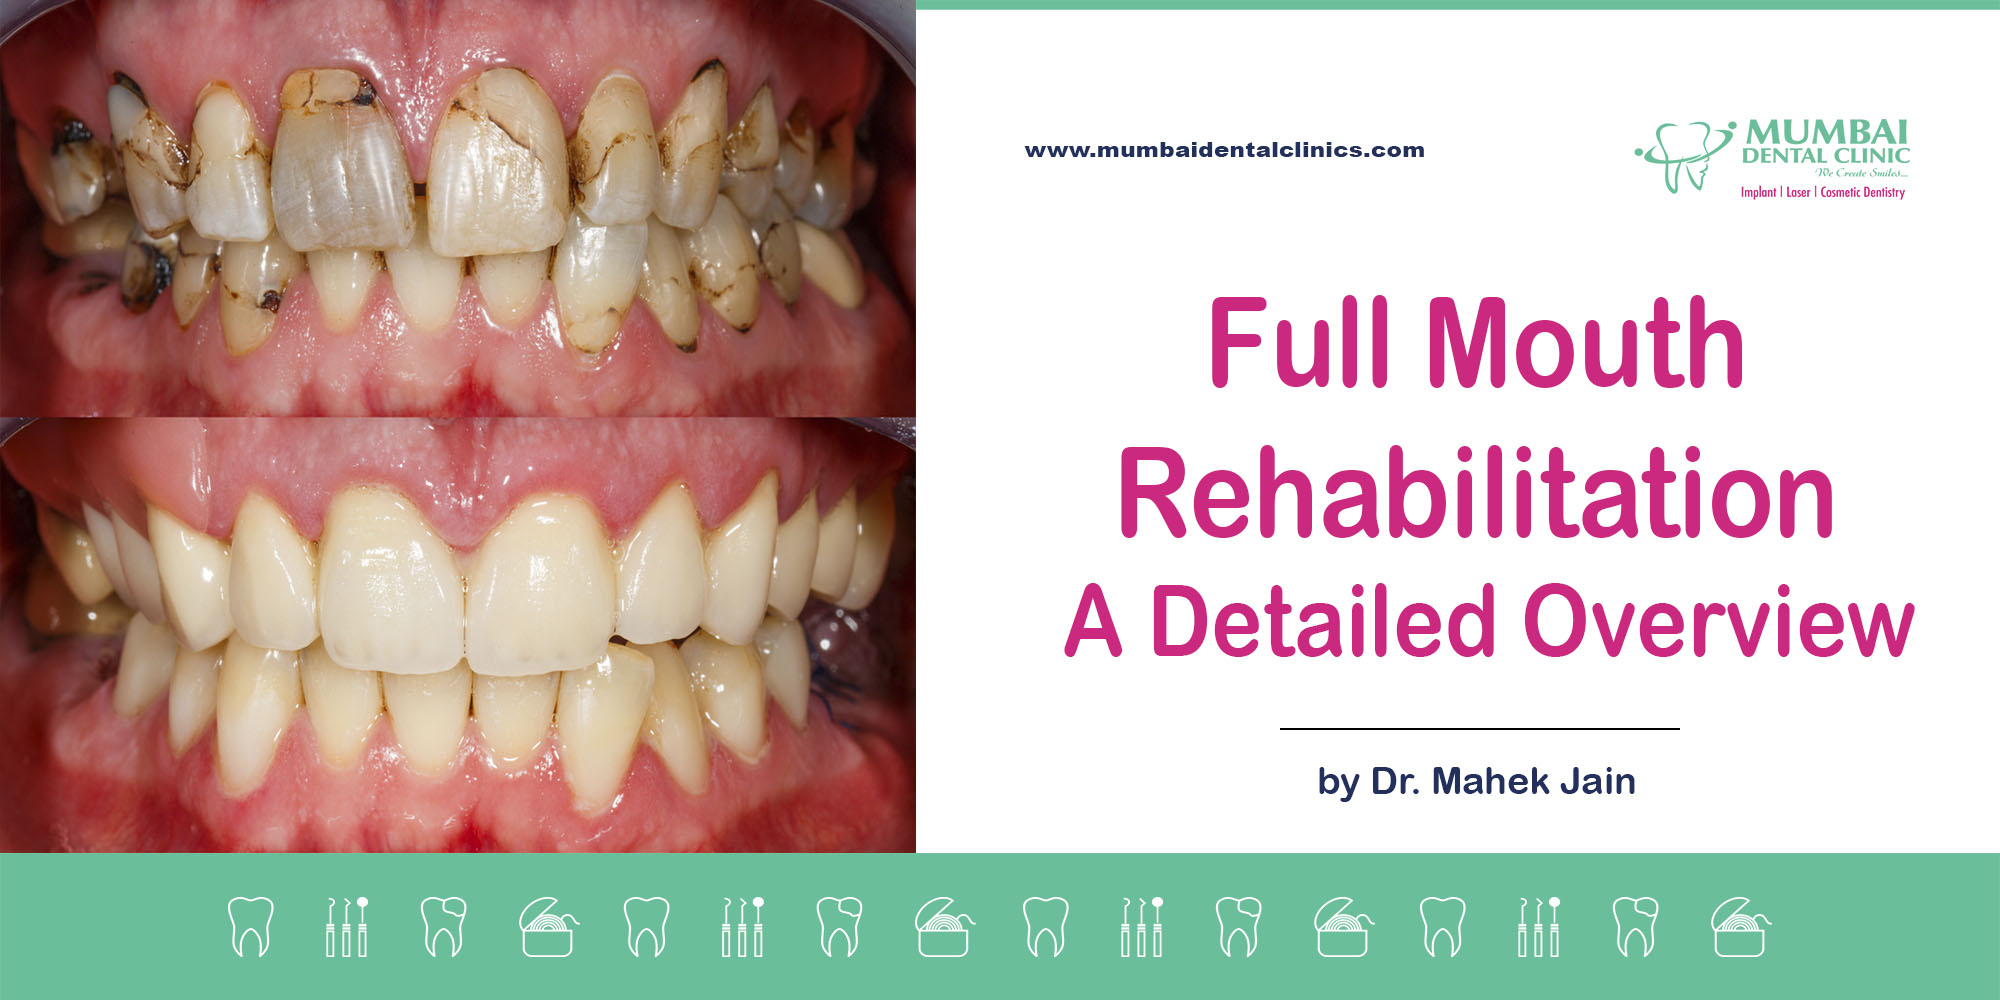 Importance of smile designing in your life, best dentist in udaipur,smile designing treatment in udaipur,Braces specialist in Udaipur,Braces doctor in Udaipur,full mouth rehabilitation treatment in udaipur